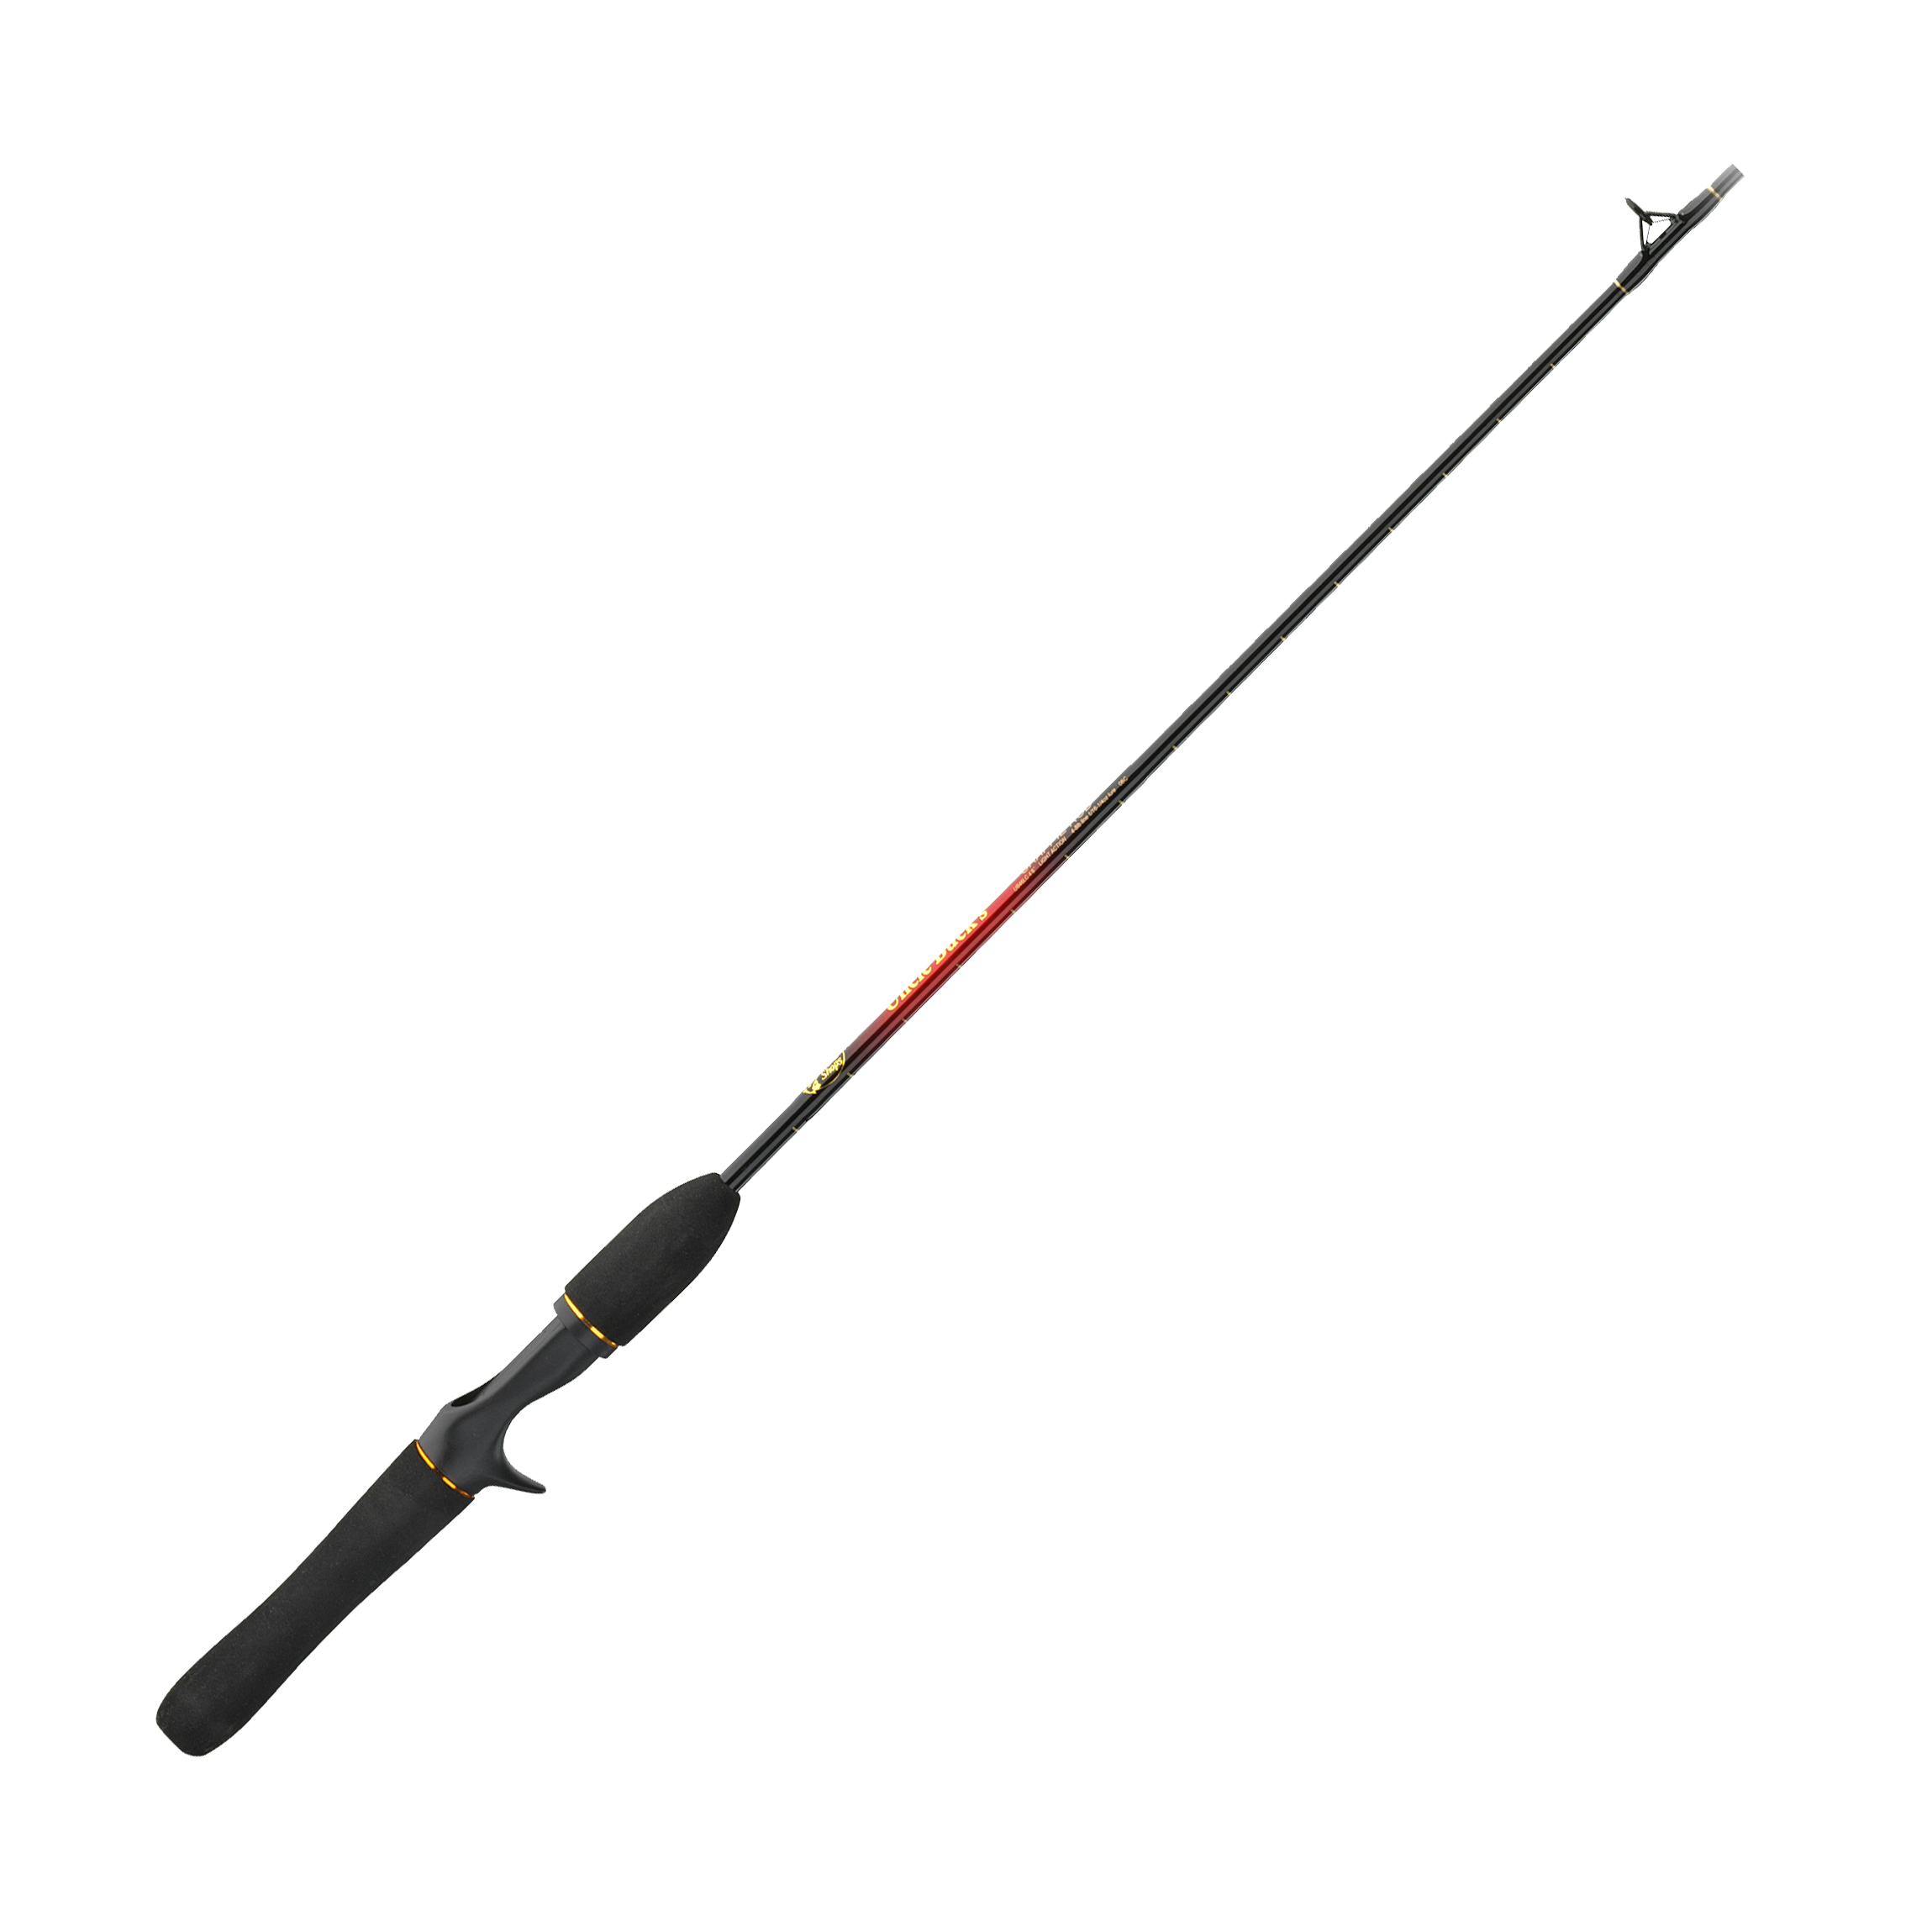 Uncle Buck's Crappie Casting Rod - 6'